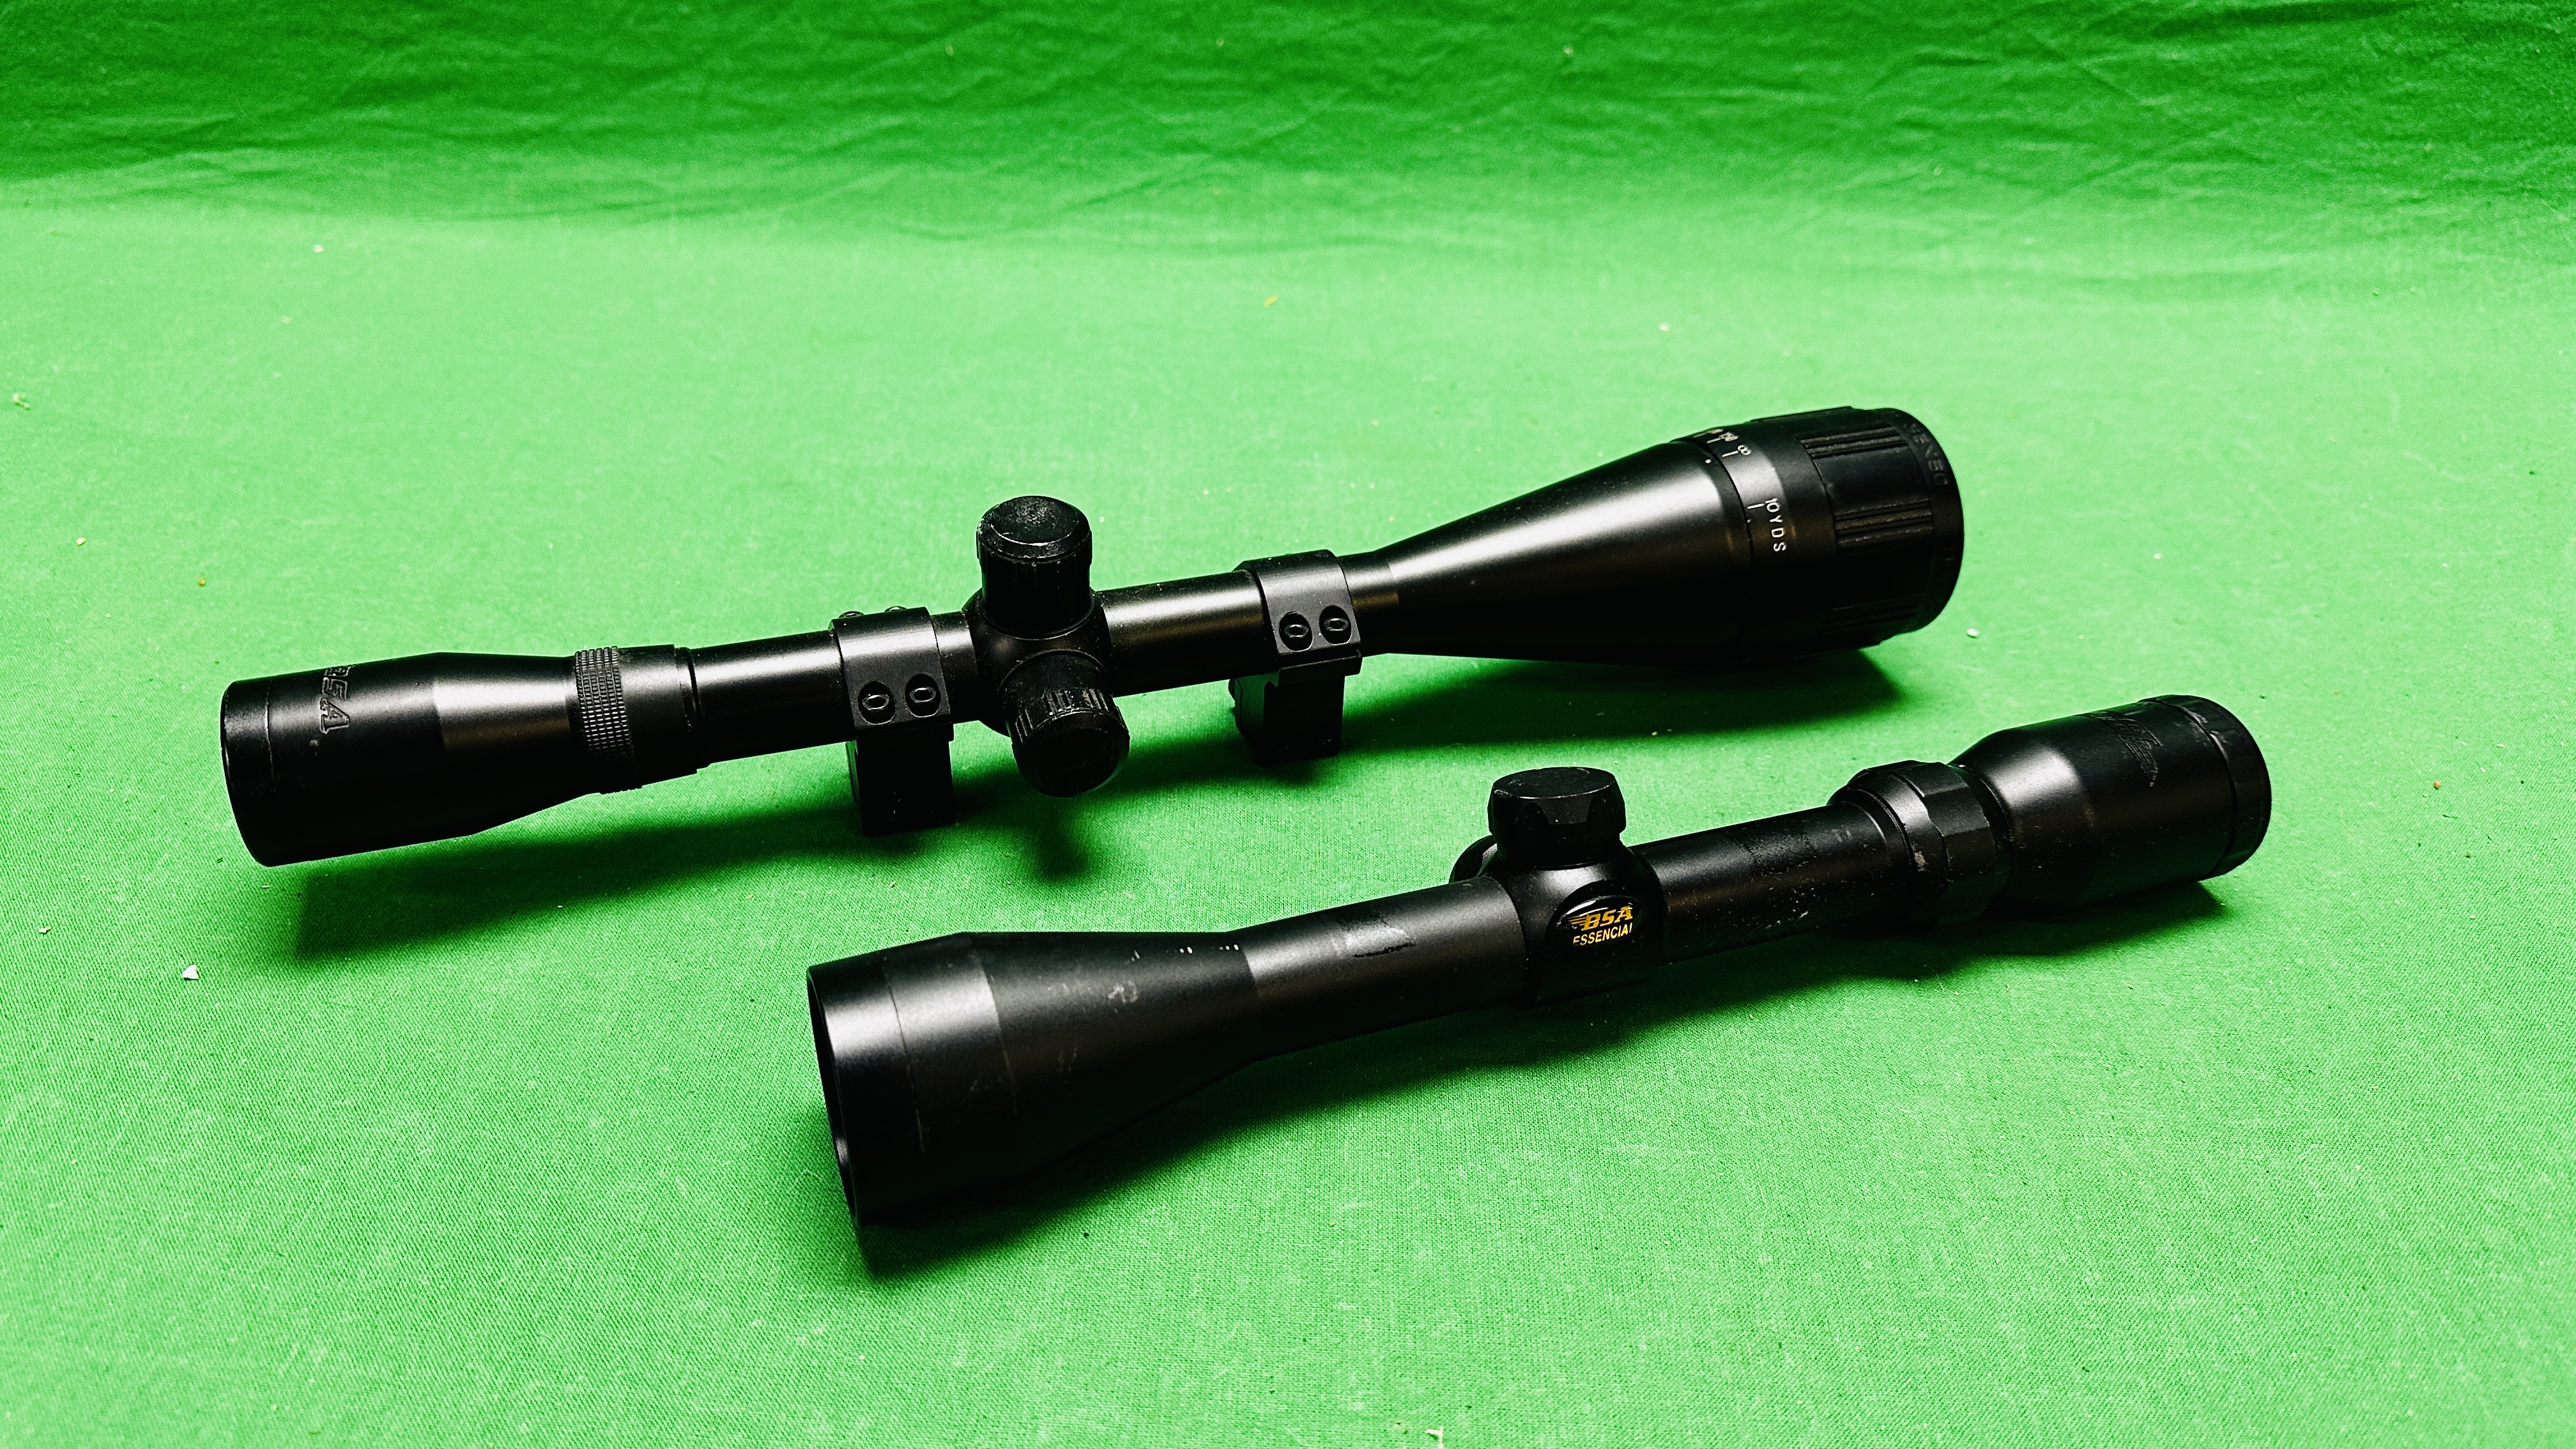 TWO BSA RIFLE SCOPES TO INCLUDE CONTENDER 36X50 WITH MOUNTS AND ESSENTIAL.